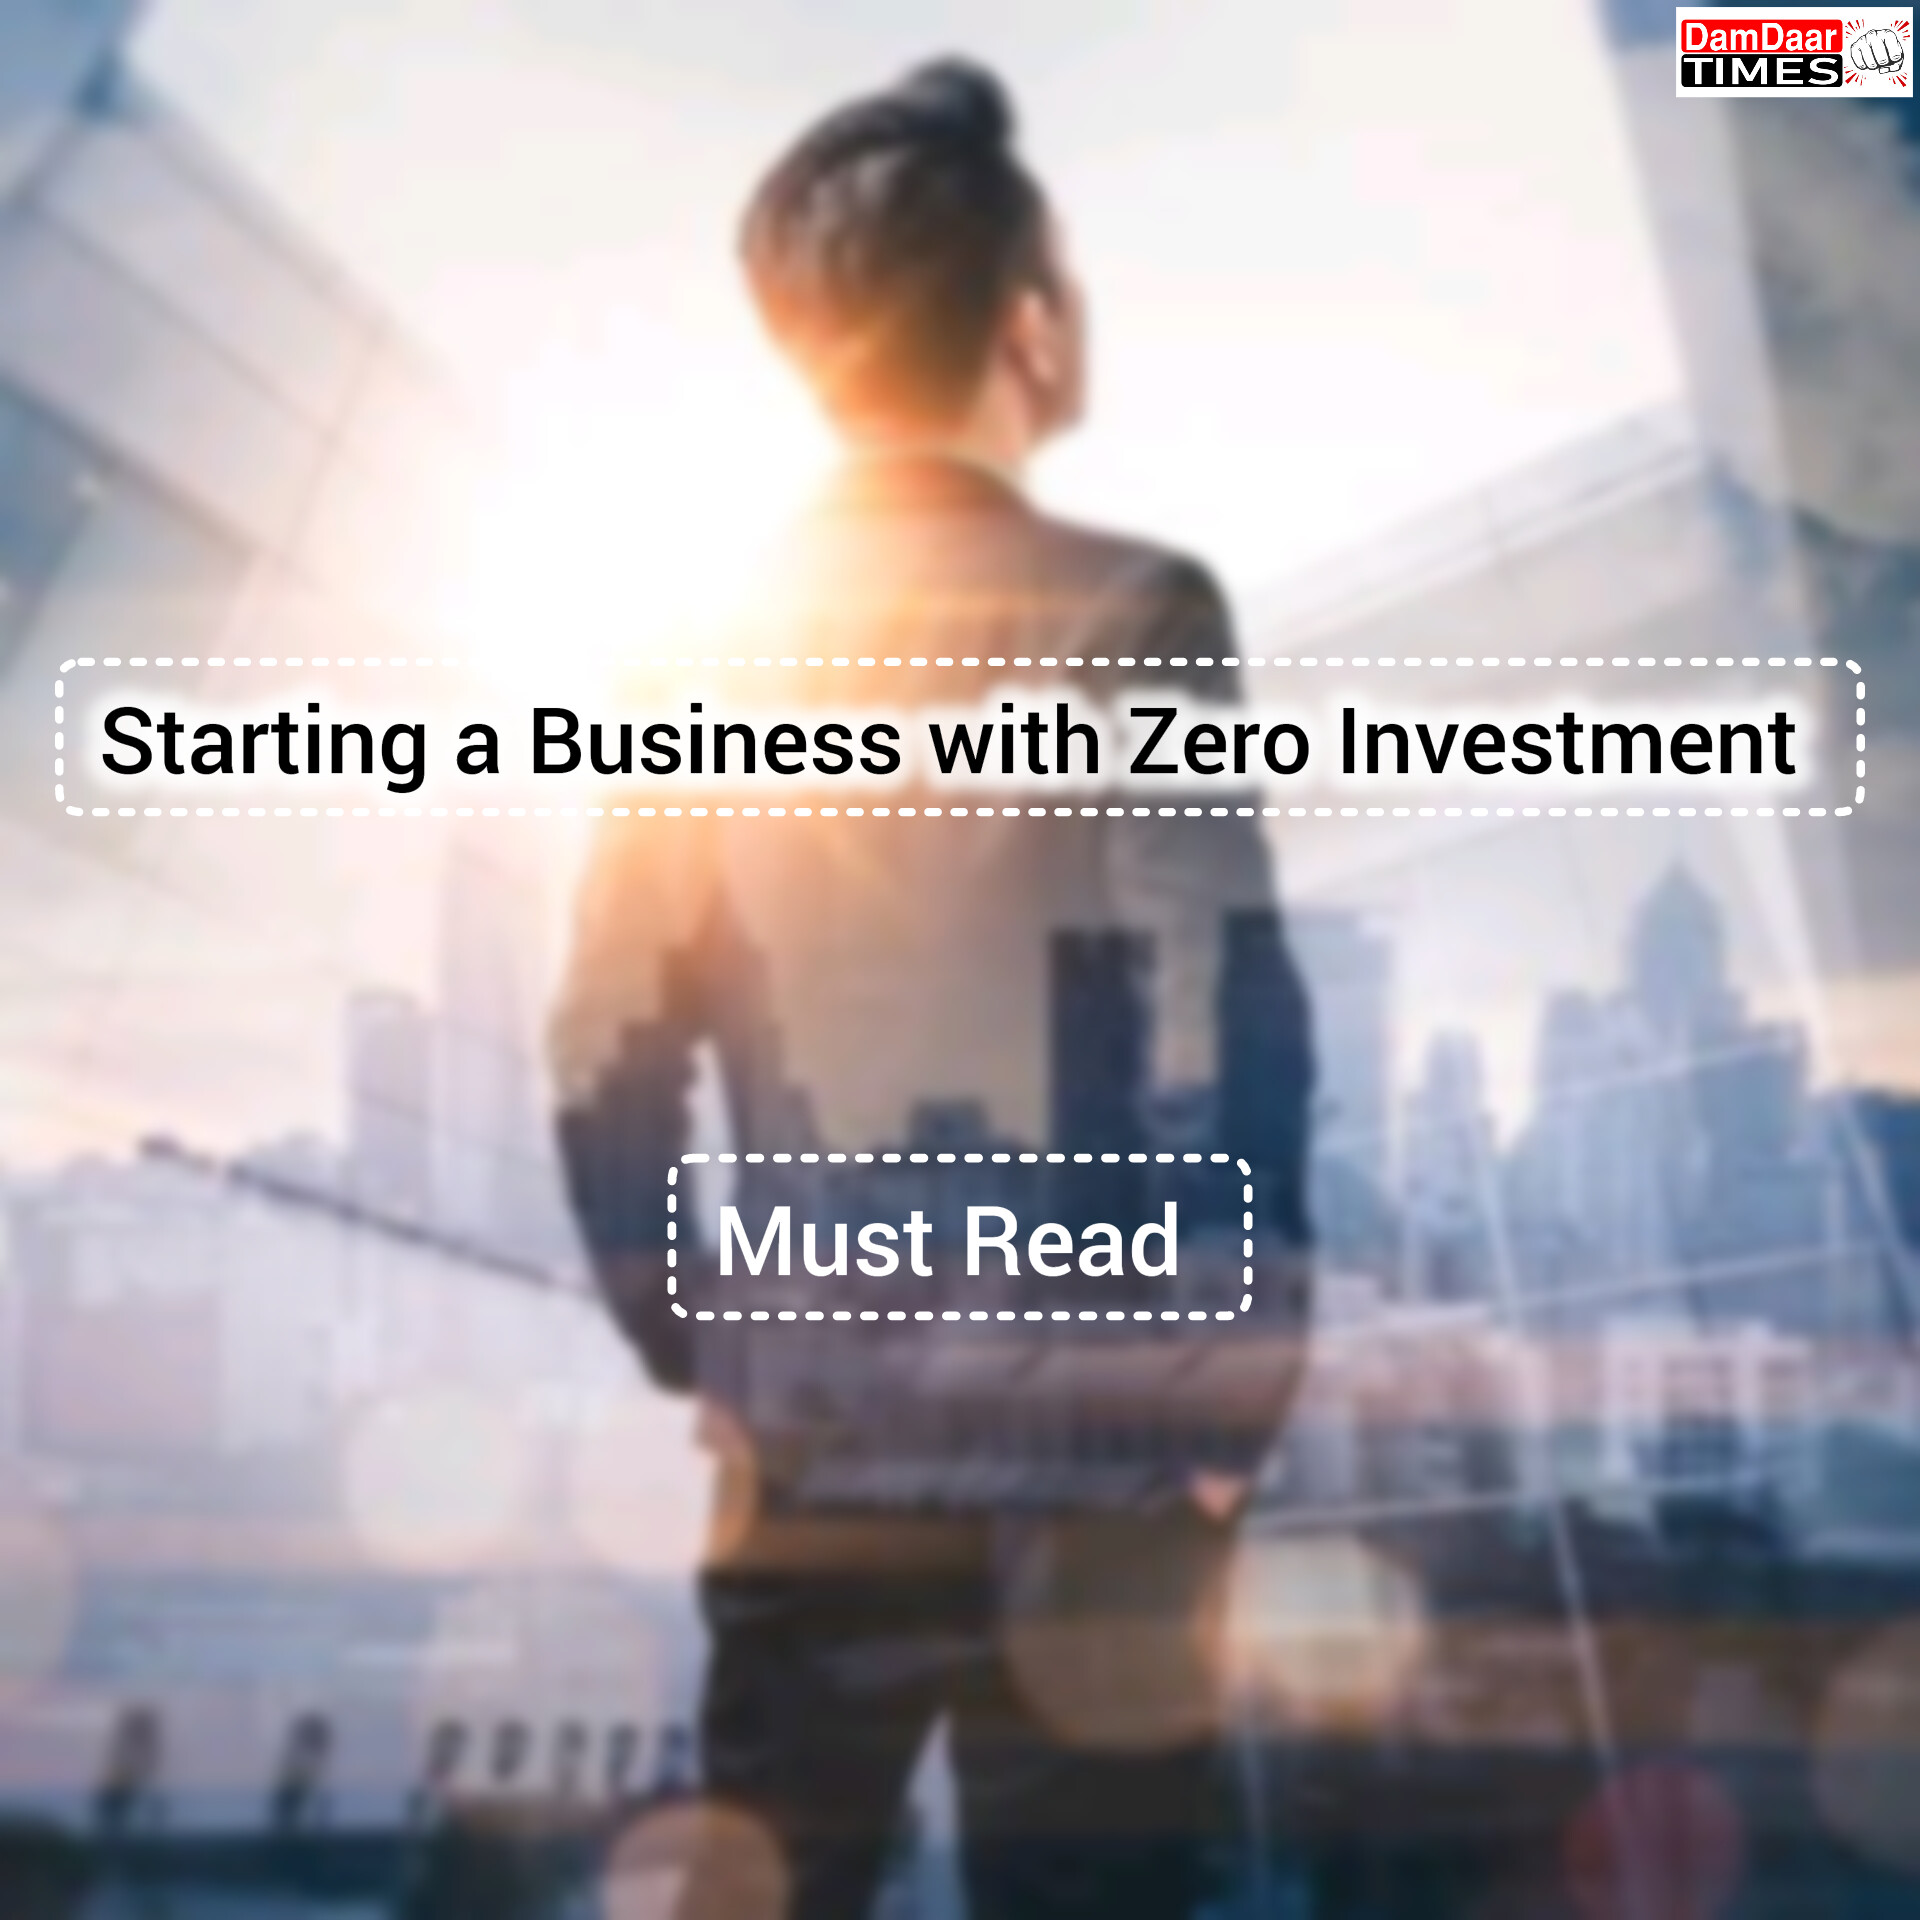 Starting a Business with Zero Investment